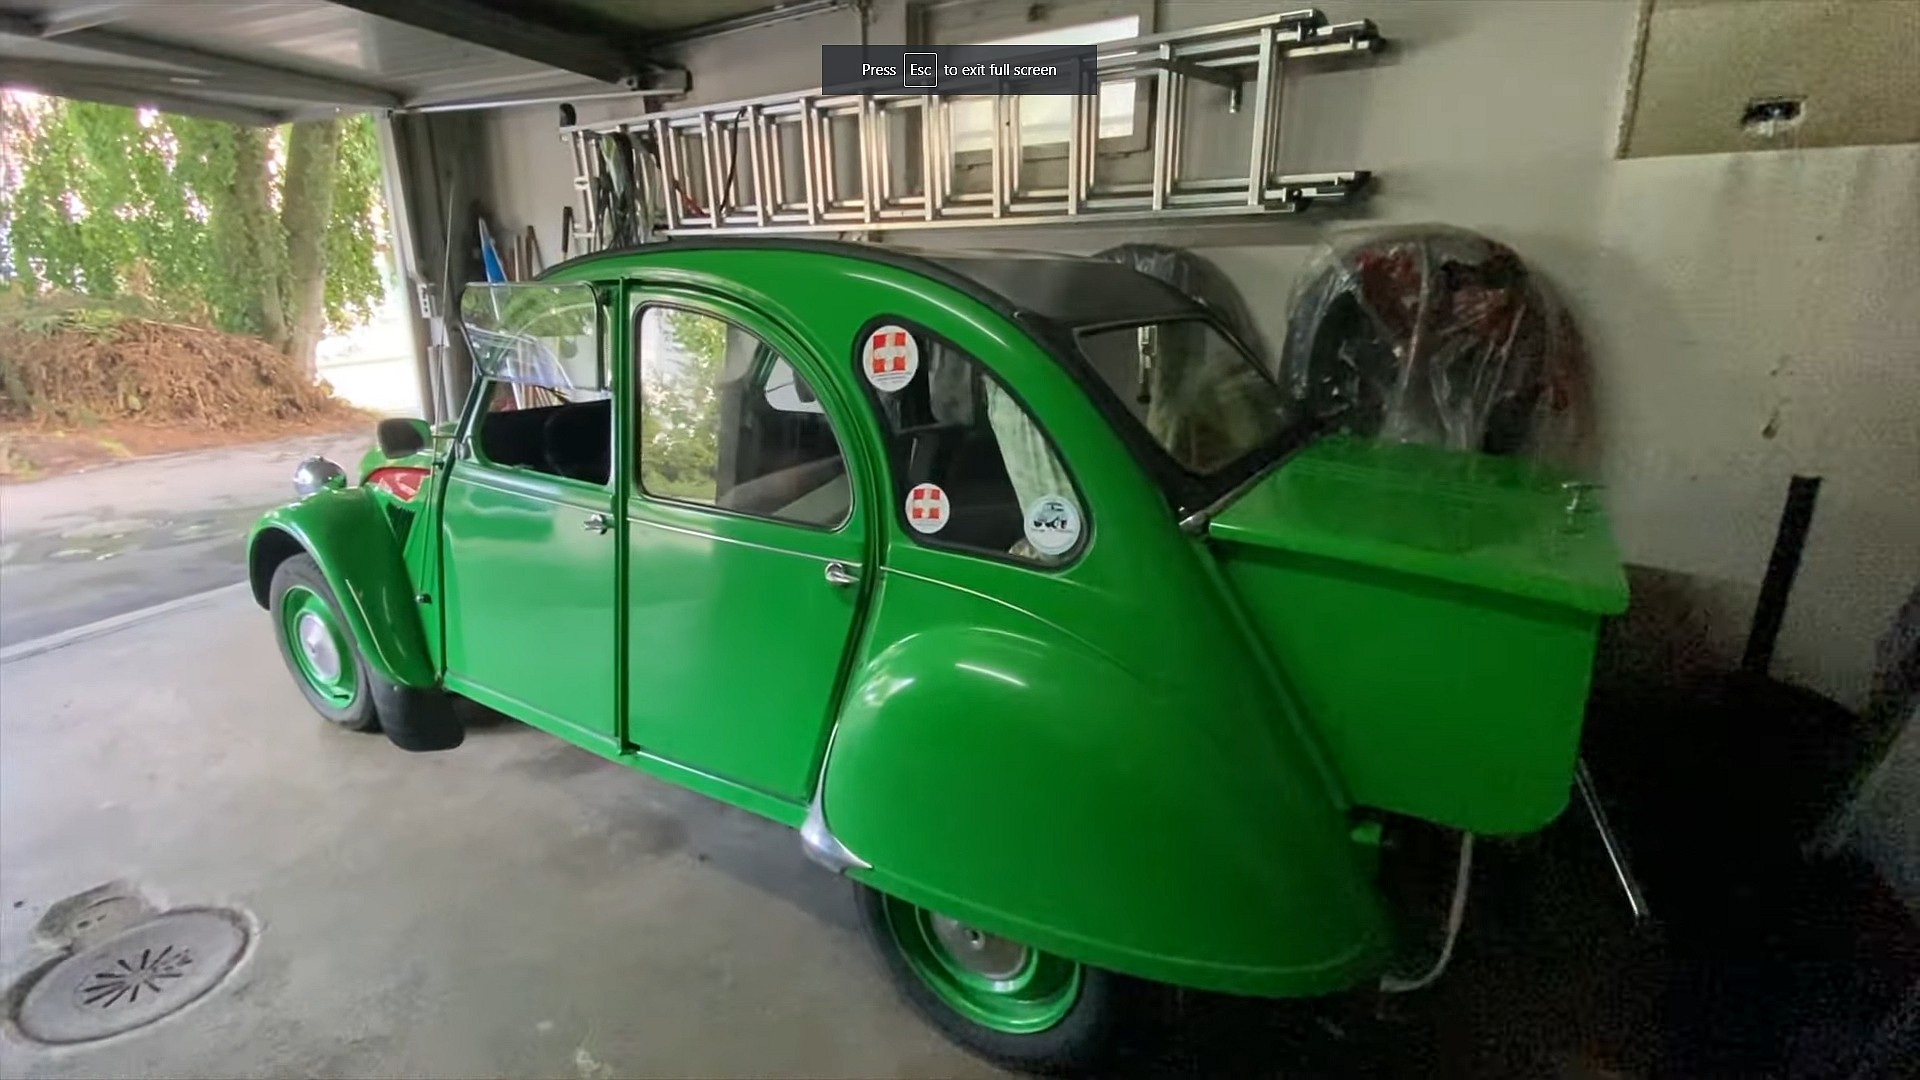 See Tiny Citroen 2CV Morph Into Camper With Double Bed, Integrated Kitchen